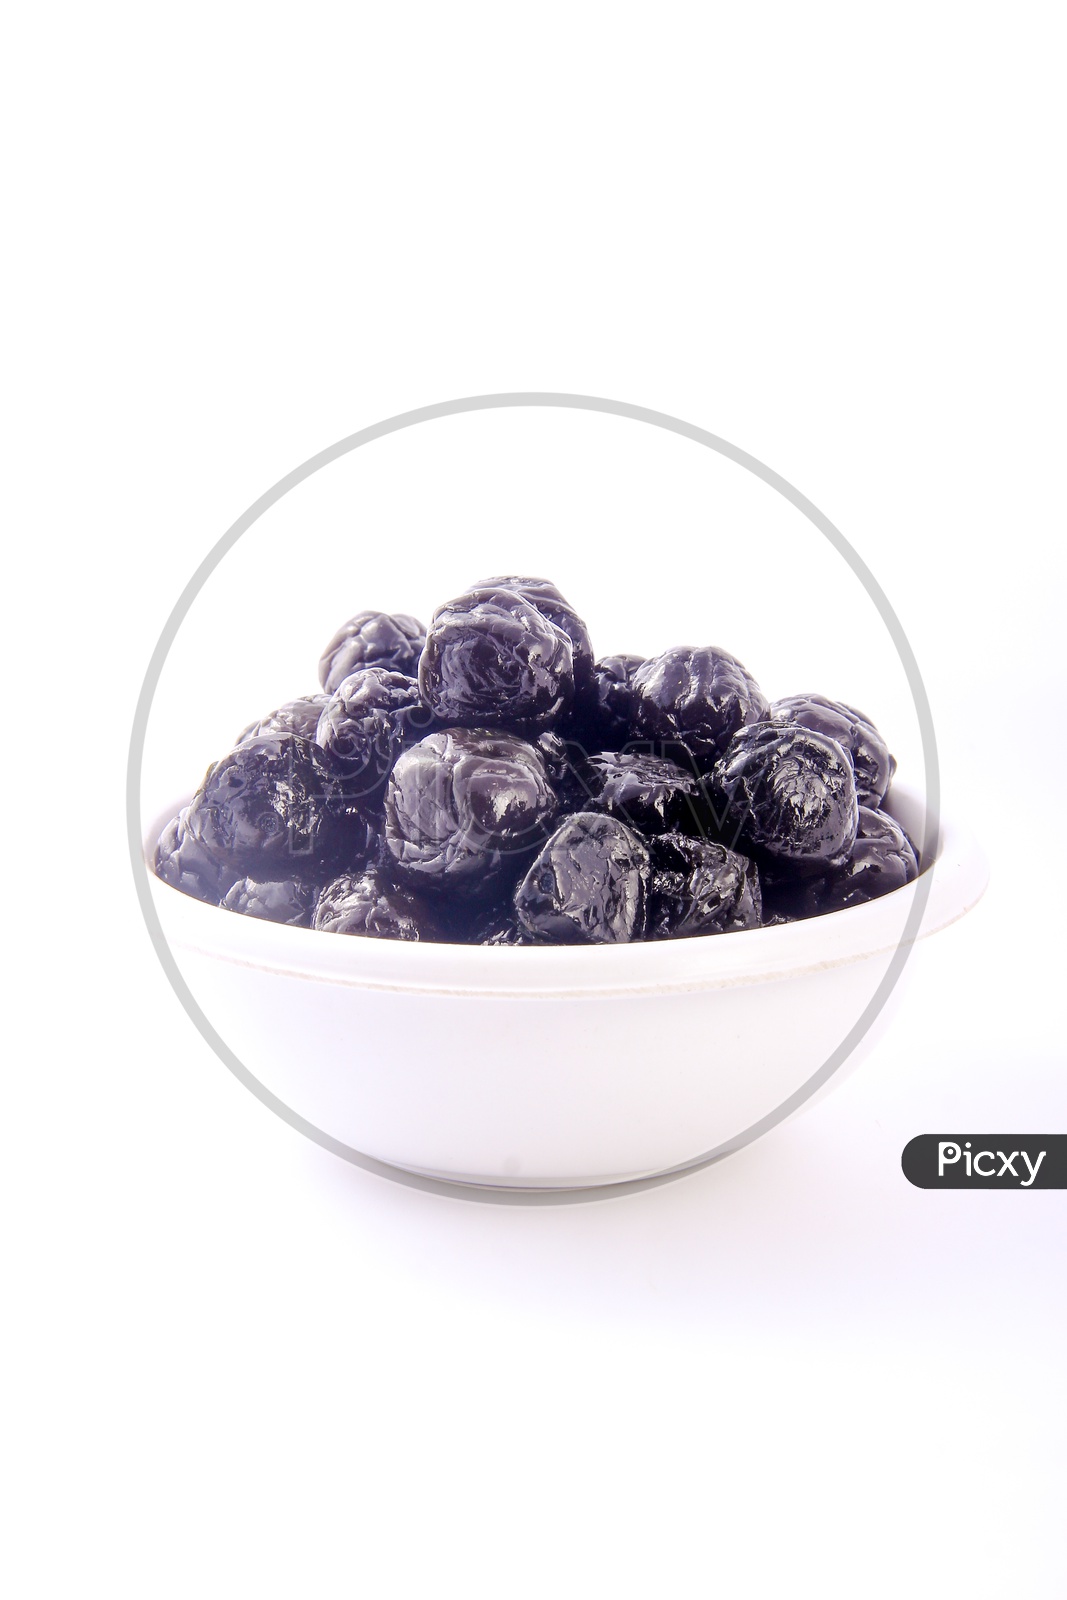 Dry Prunes  / Plums in a Bowl on an Isolated White Background